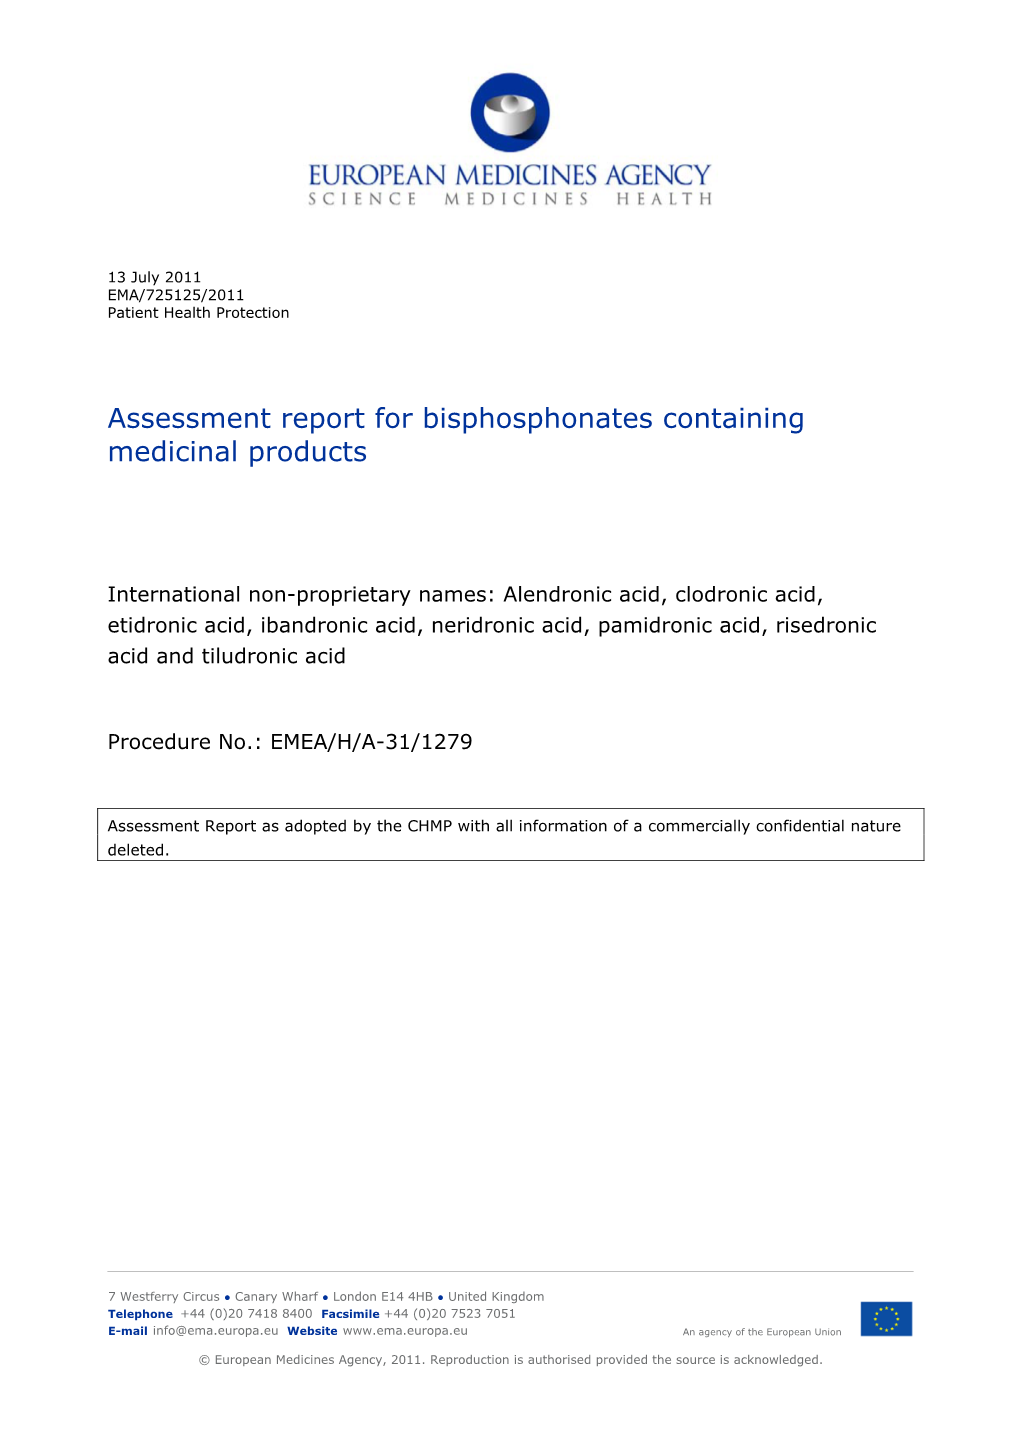 Assessment Report for Bisphosphonates Containing Medicinal Products